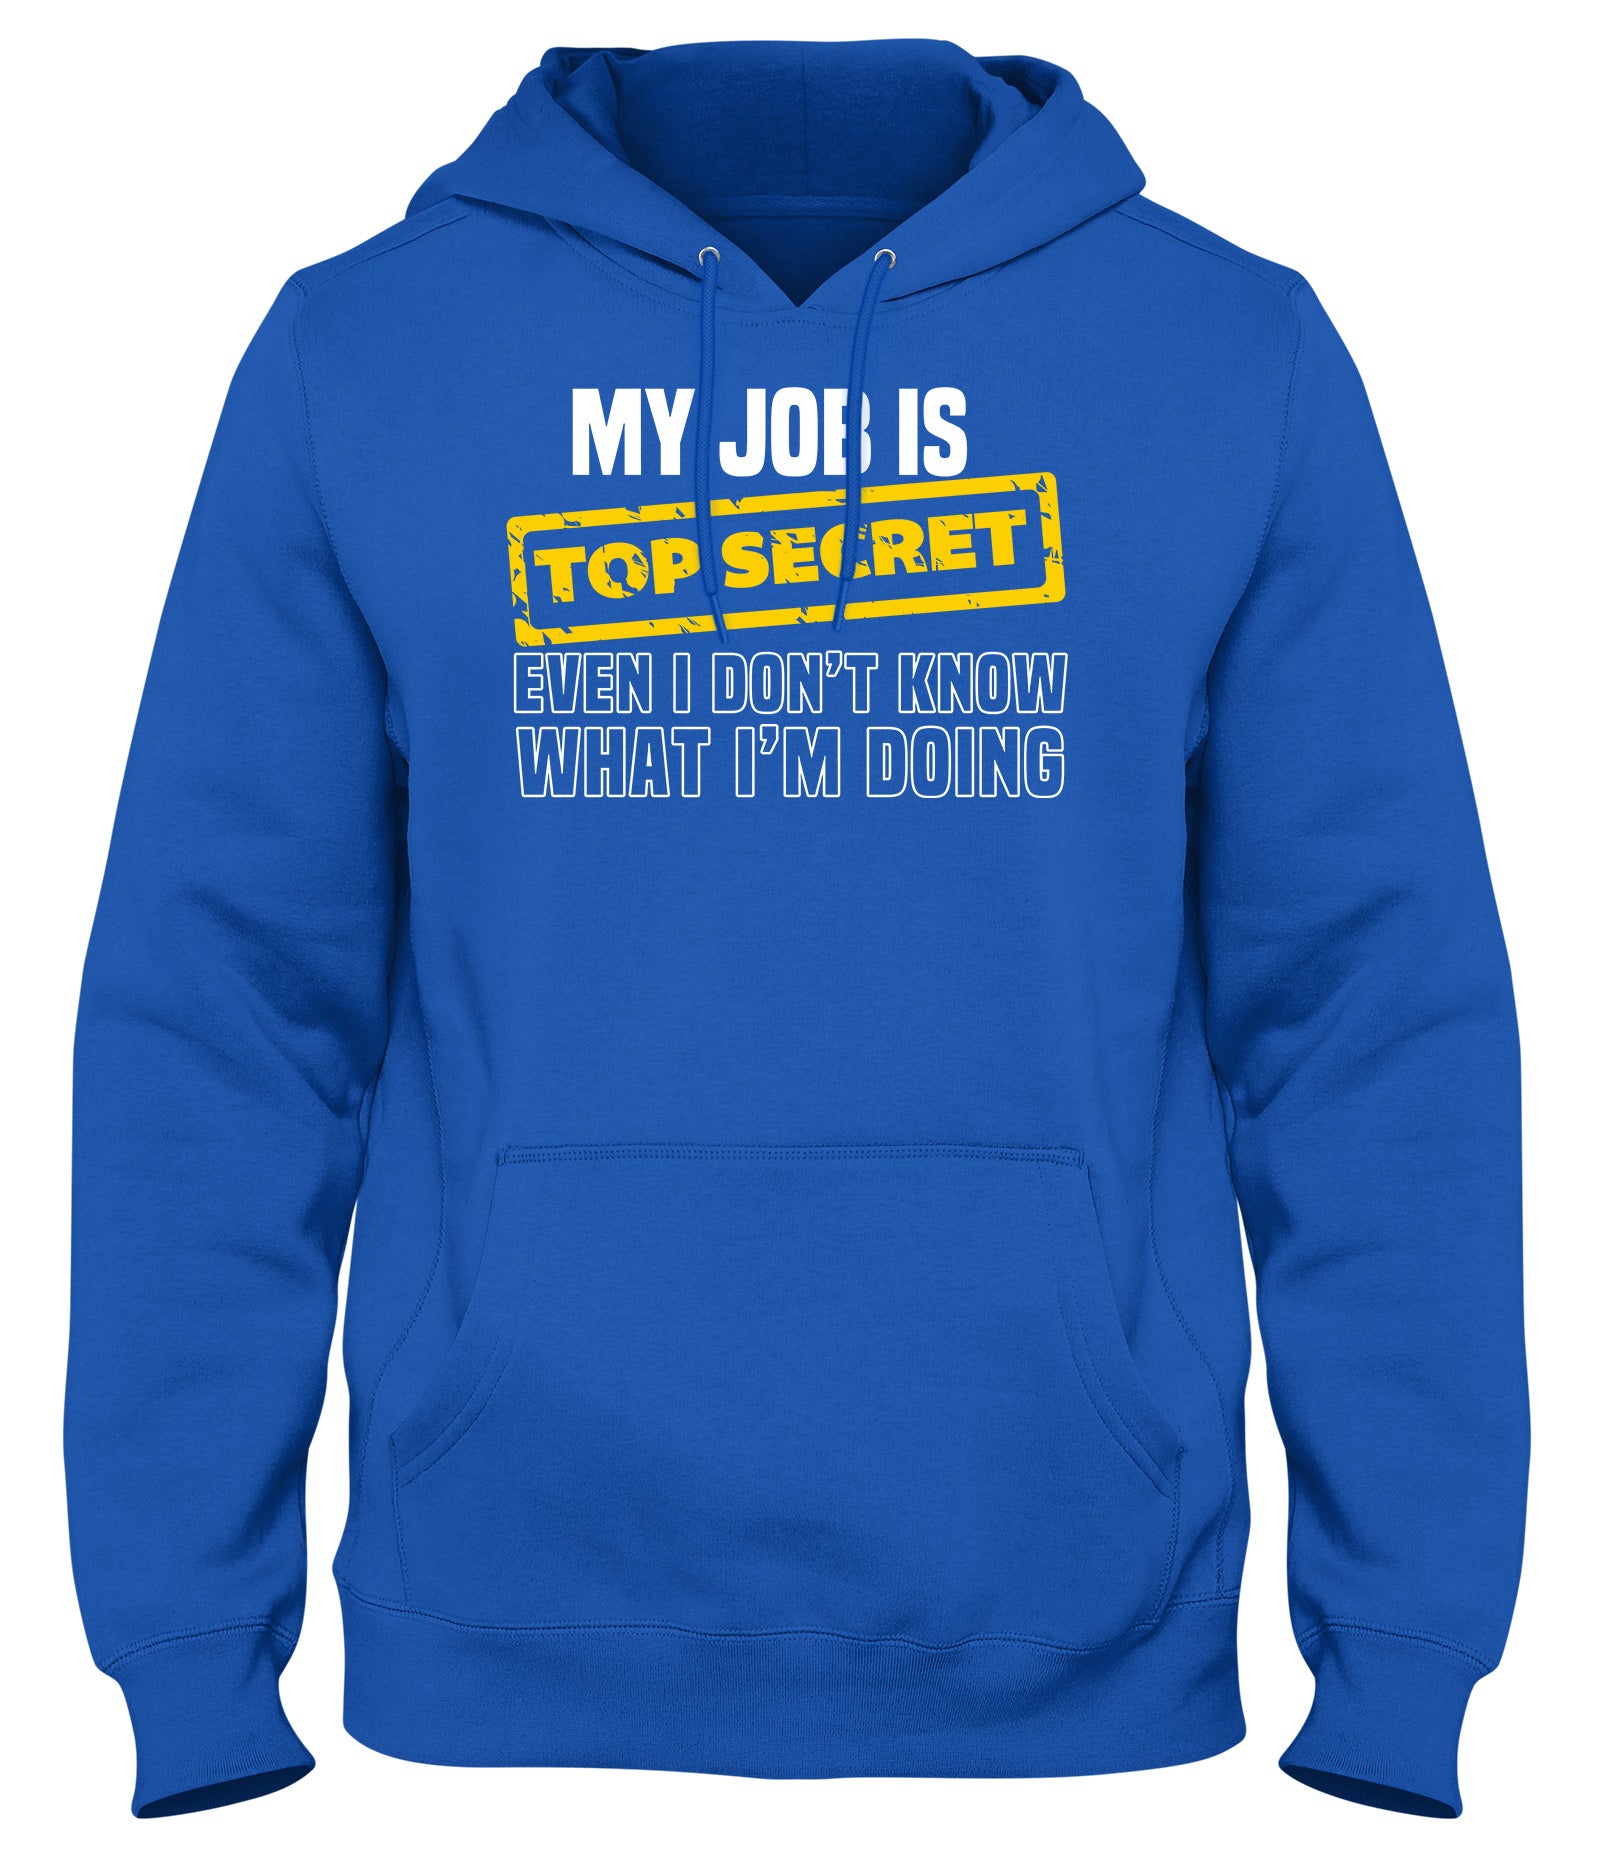 MY JOB IS TOP SECRET EVEN I DON'T KNOW WHAT I'M DOING MENS WOMENS LADIES UNISEX FUNNY SLOGAN HOODIE